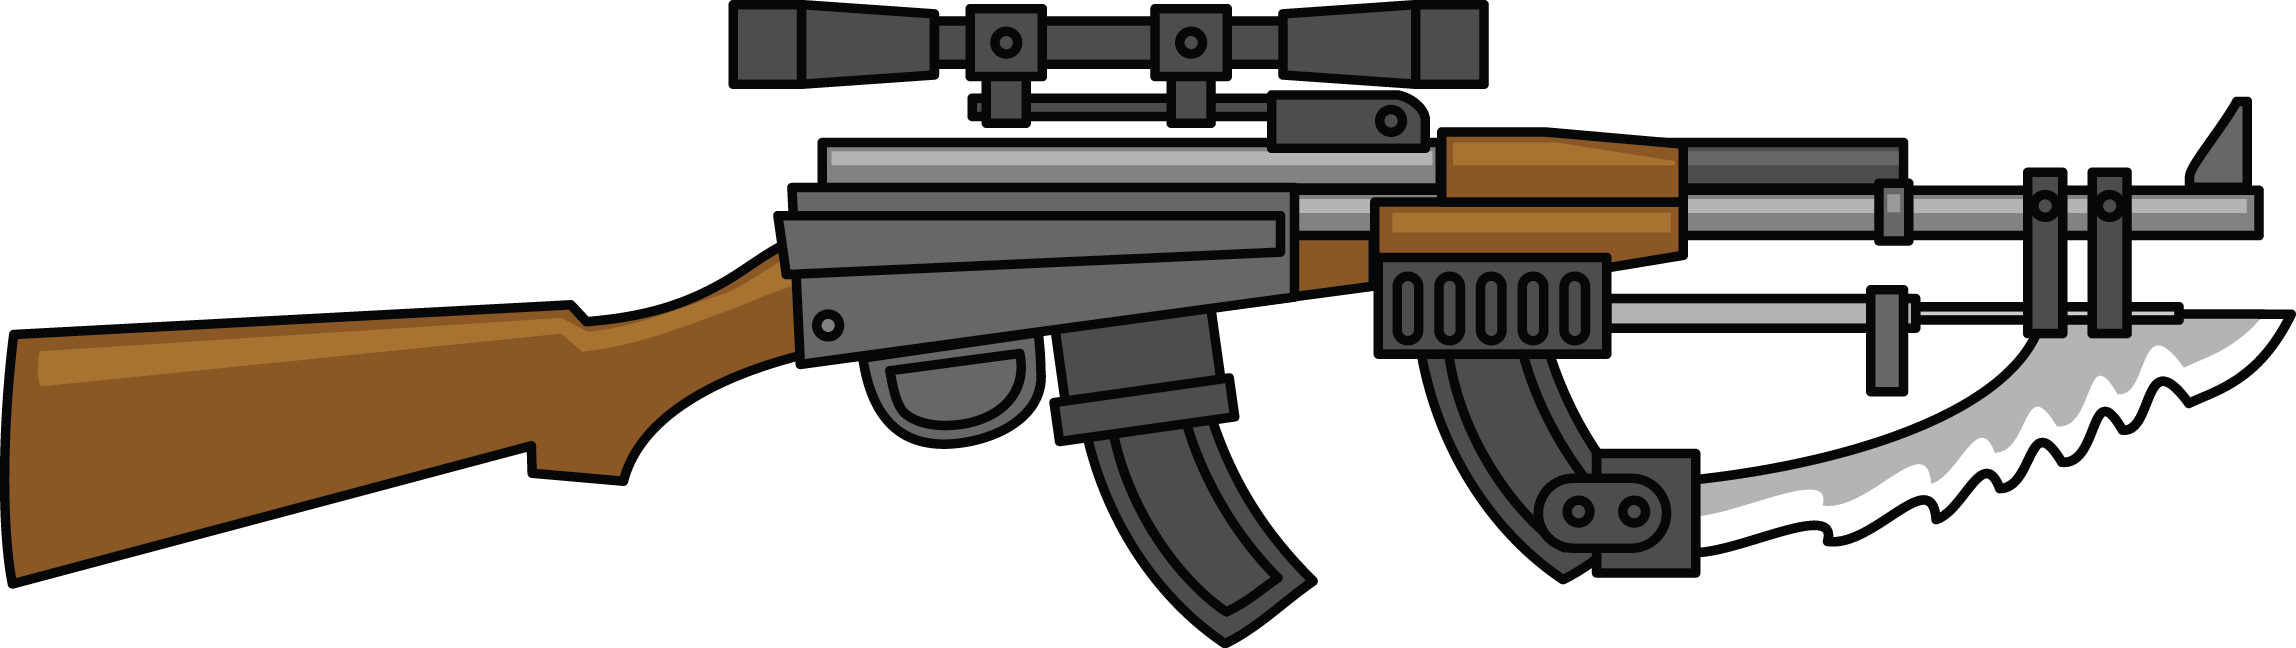 Assault Rifle With Bayonet Attachment